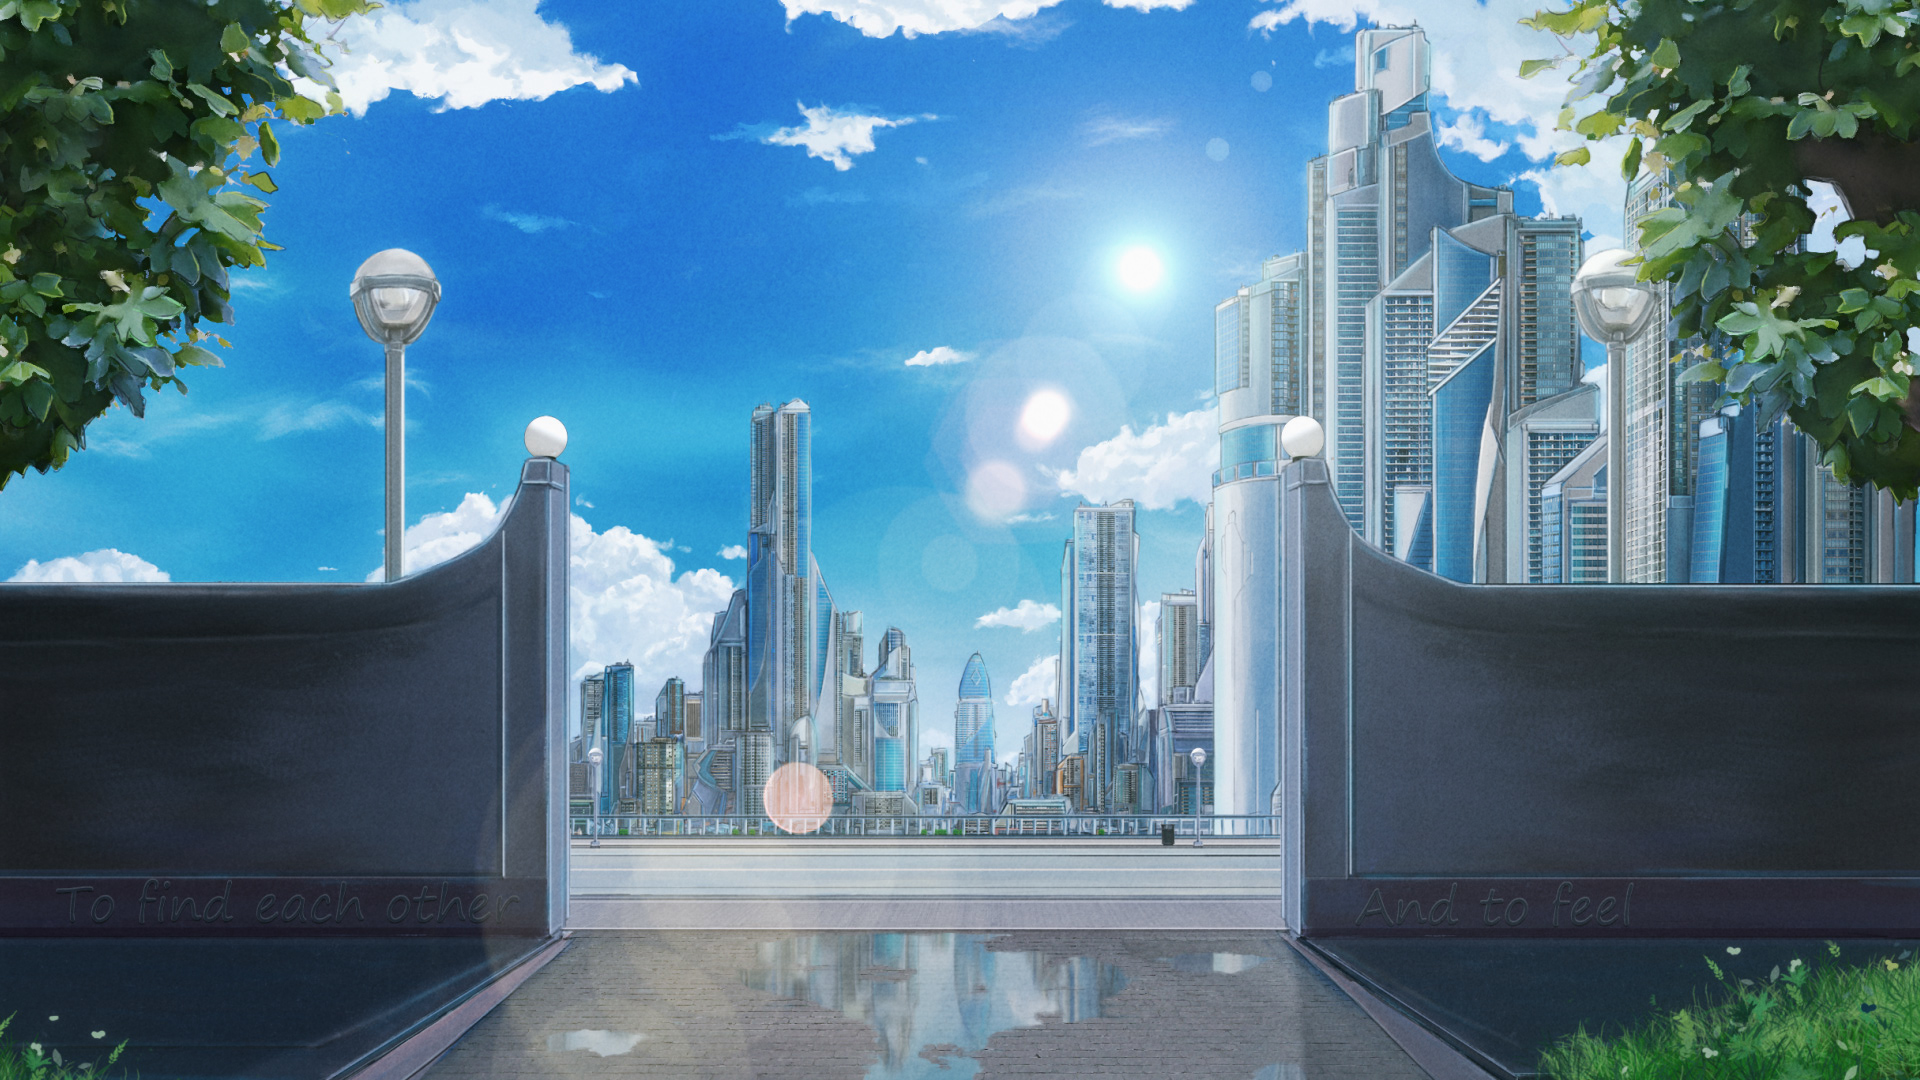 Outdoors Digital Art Anime City Fantasy City City Clouds Sky Anime Building Cityscape Street After T 1920x1080